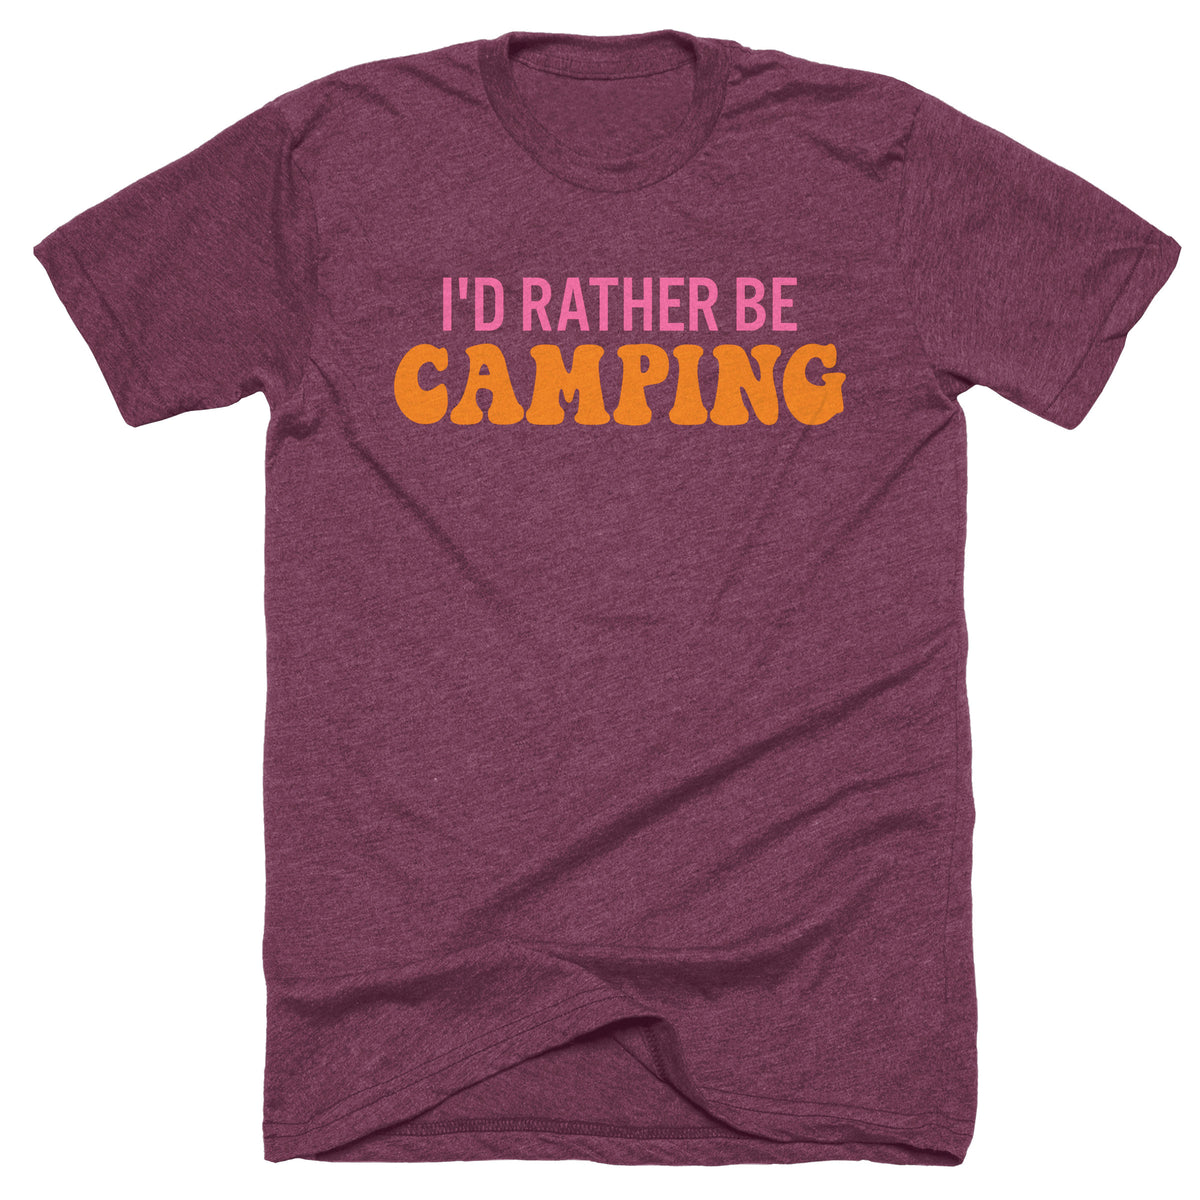 I'd Rather Be Camping Tee